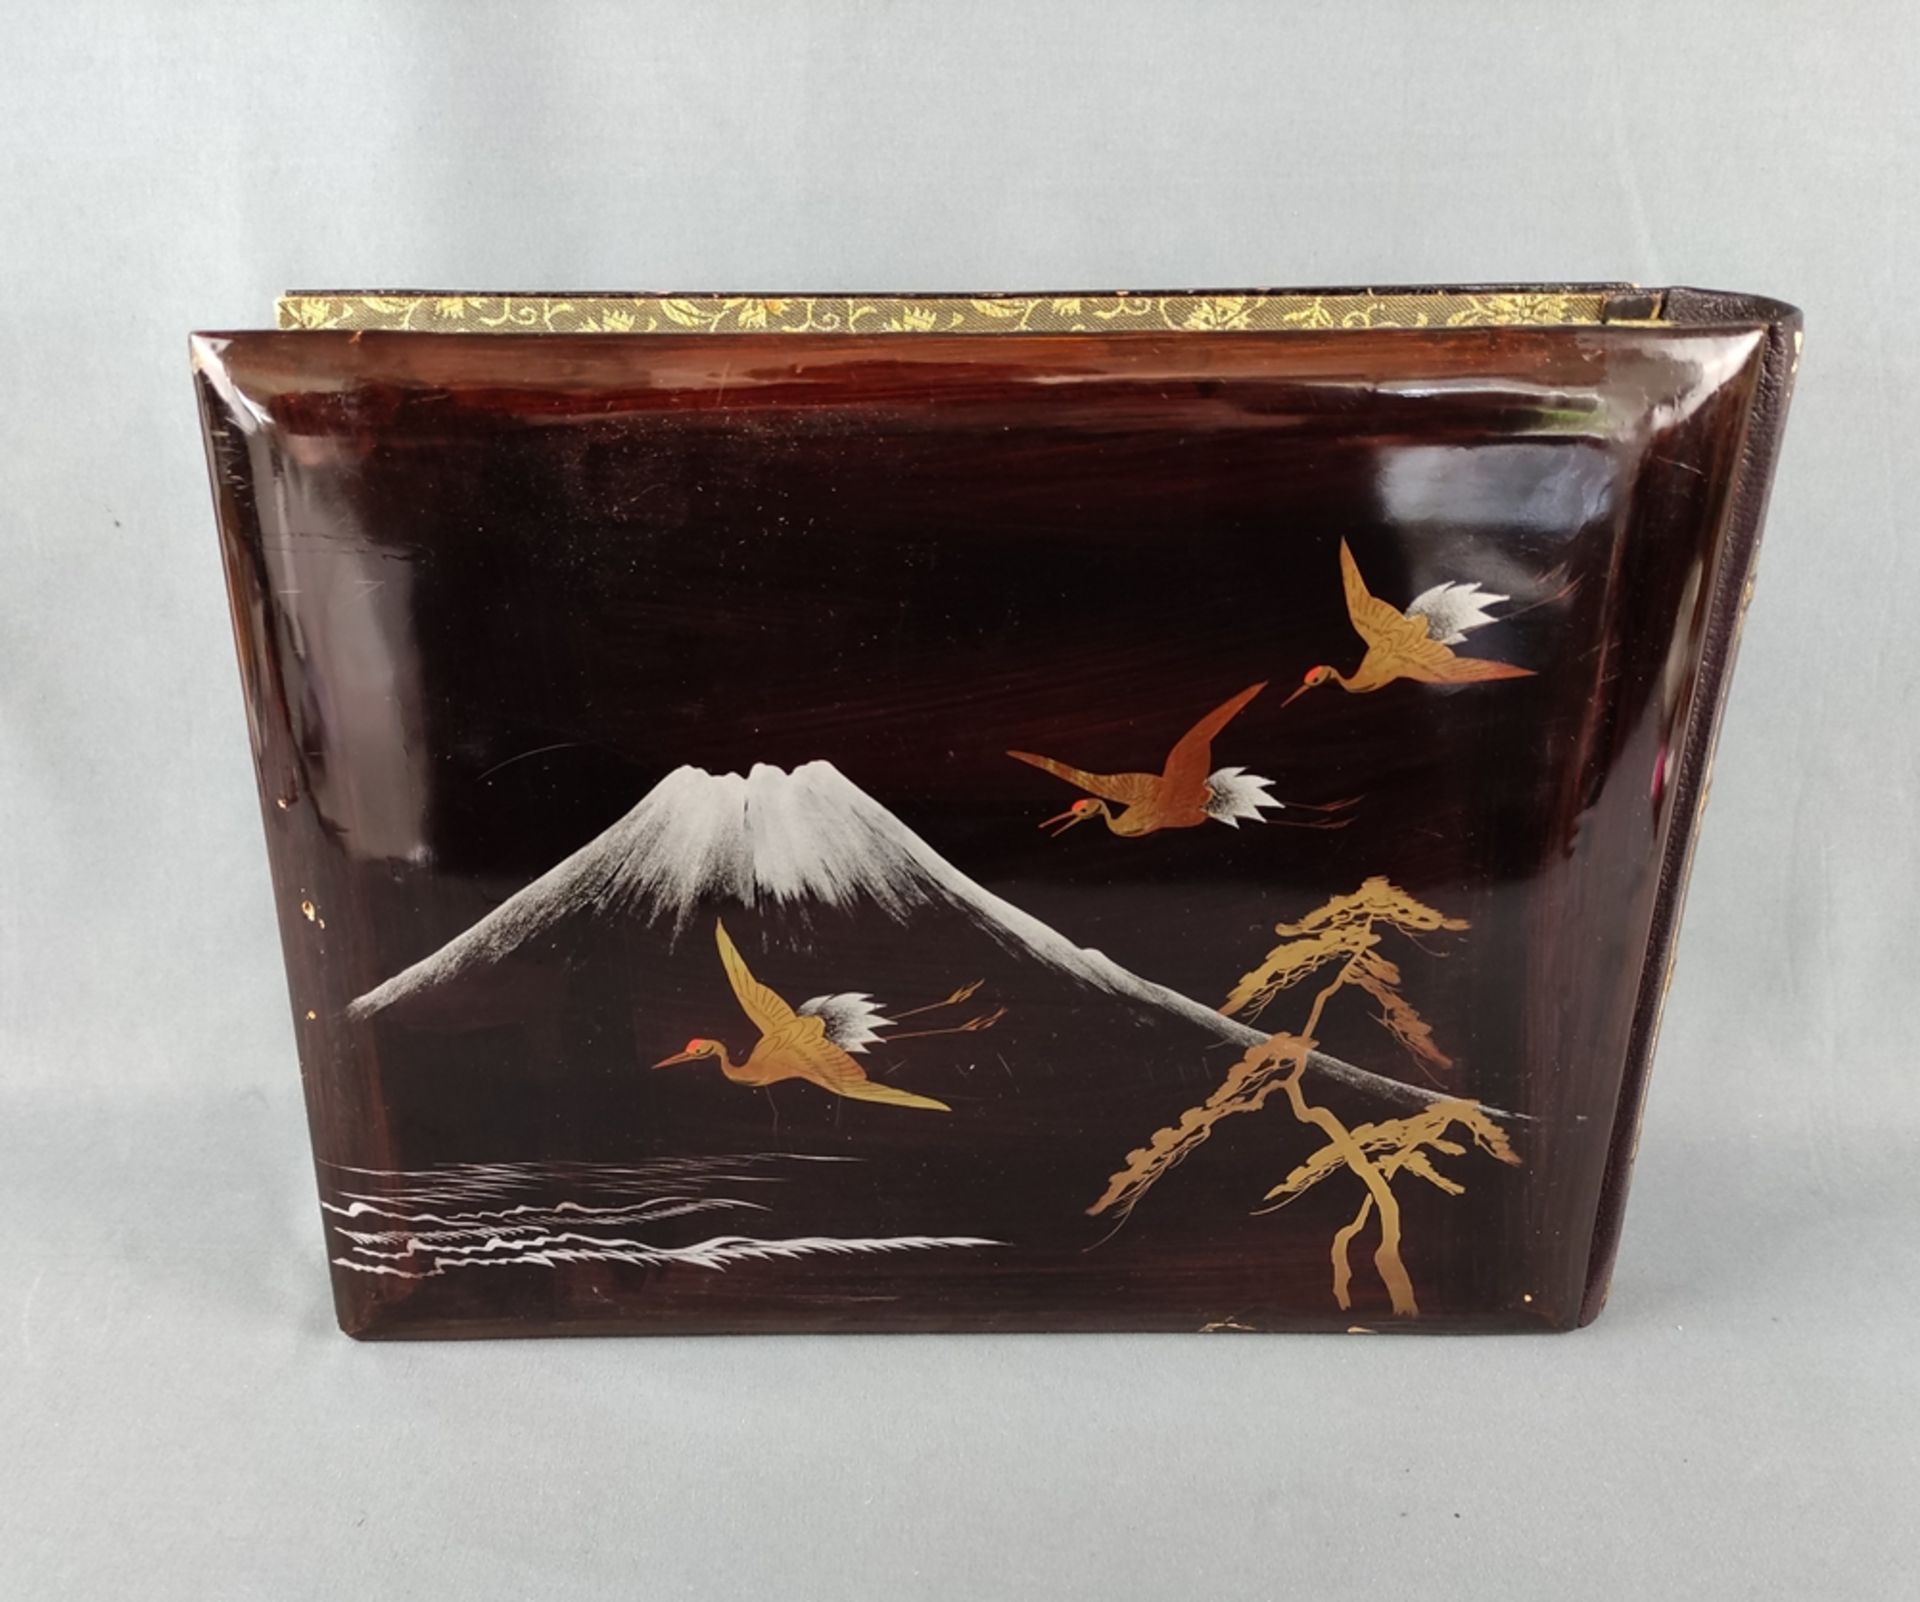 China, rare elaborate photo album, around 1900, black lacquer cover, cover decorated with dragons,  - Image 6 of 6